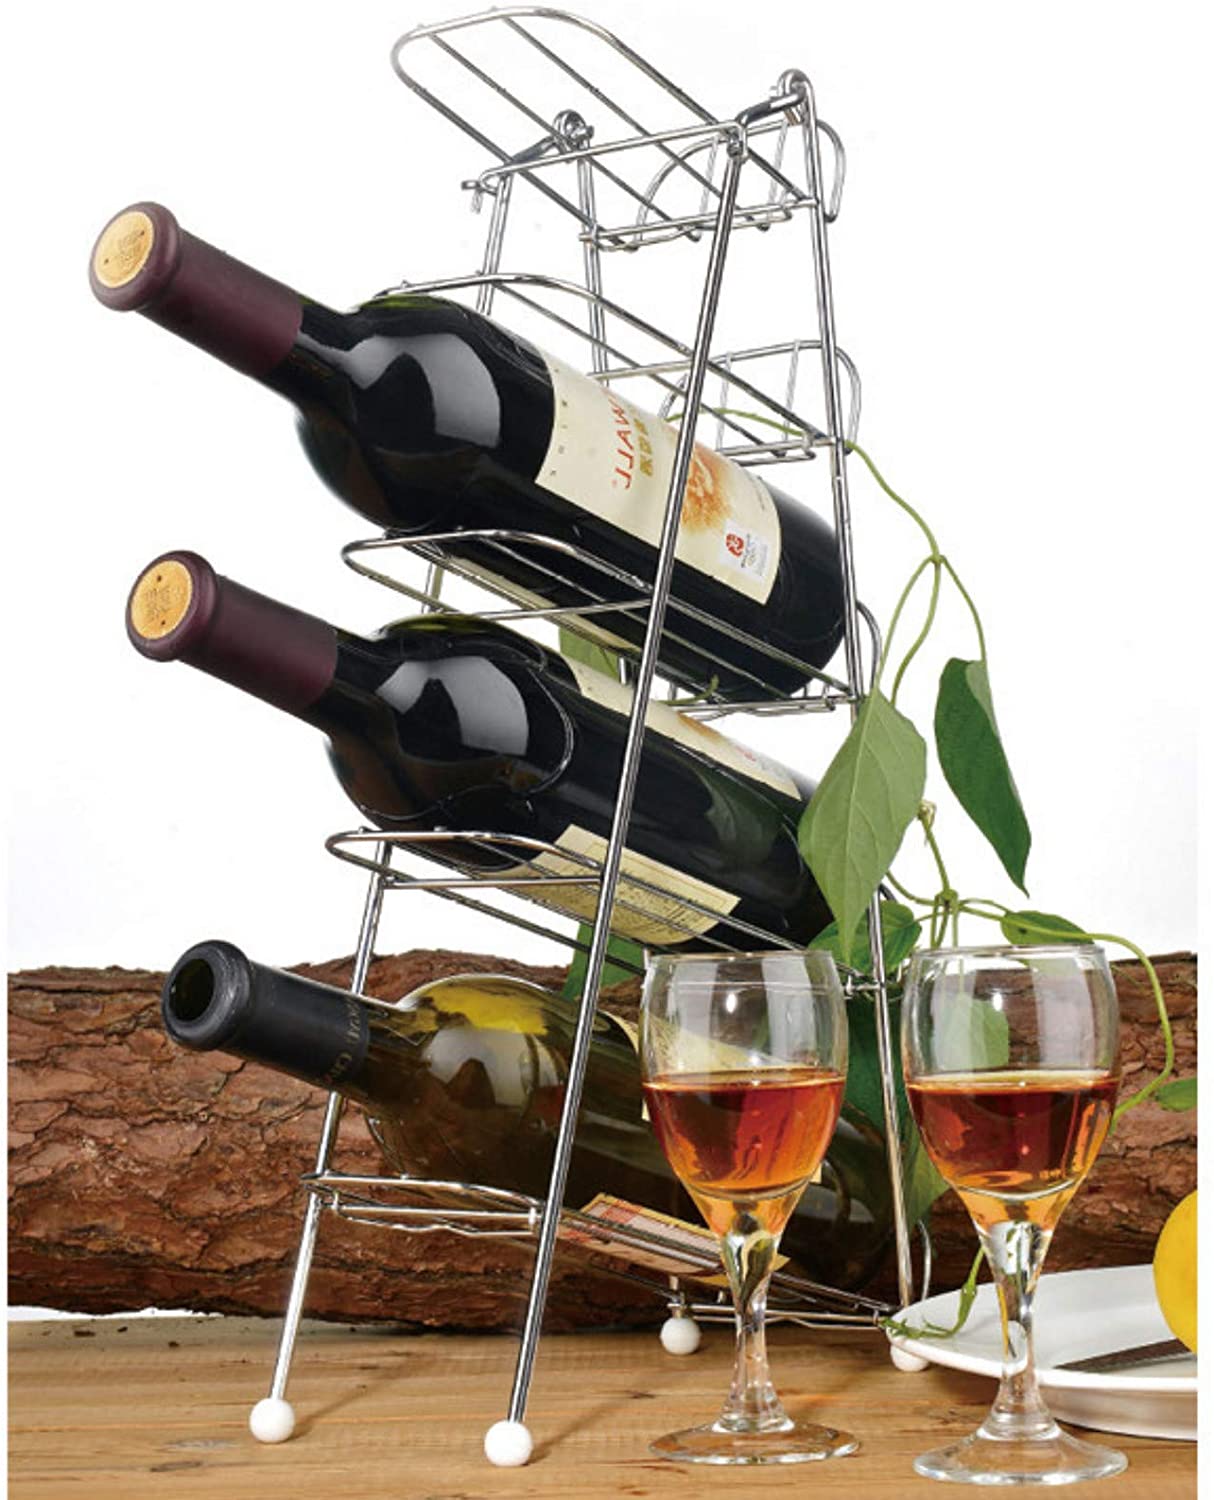 5 Tier Collapsible Wine Rack ✰ Bottle Alcohol Storage Holder ✰ RRP £14.95